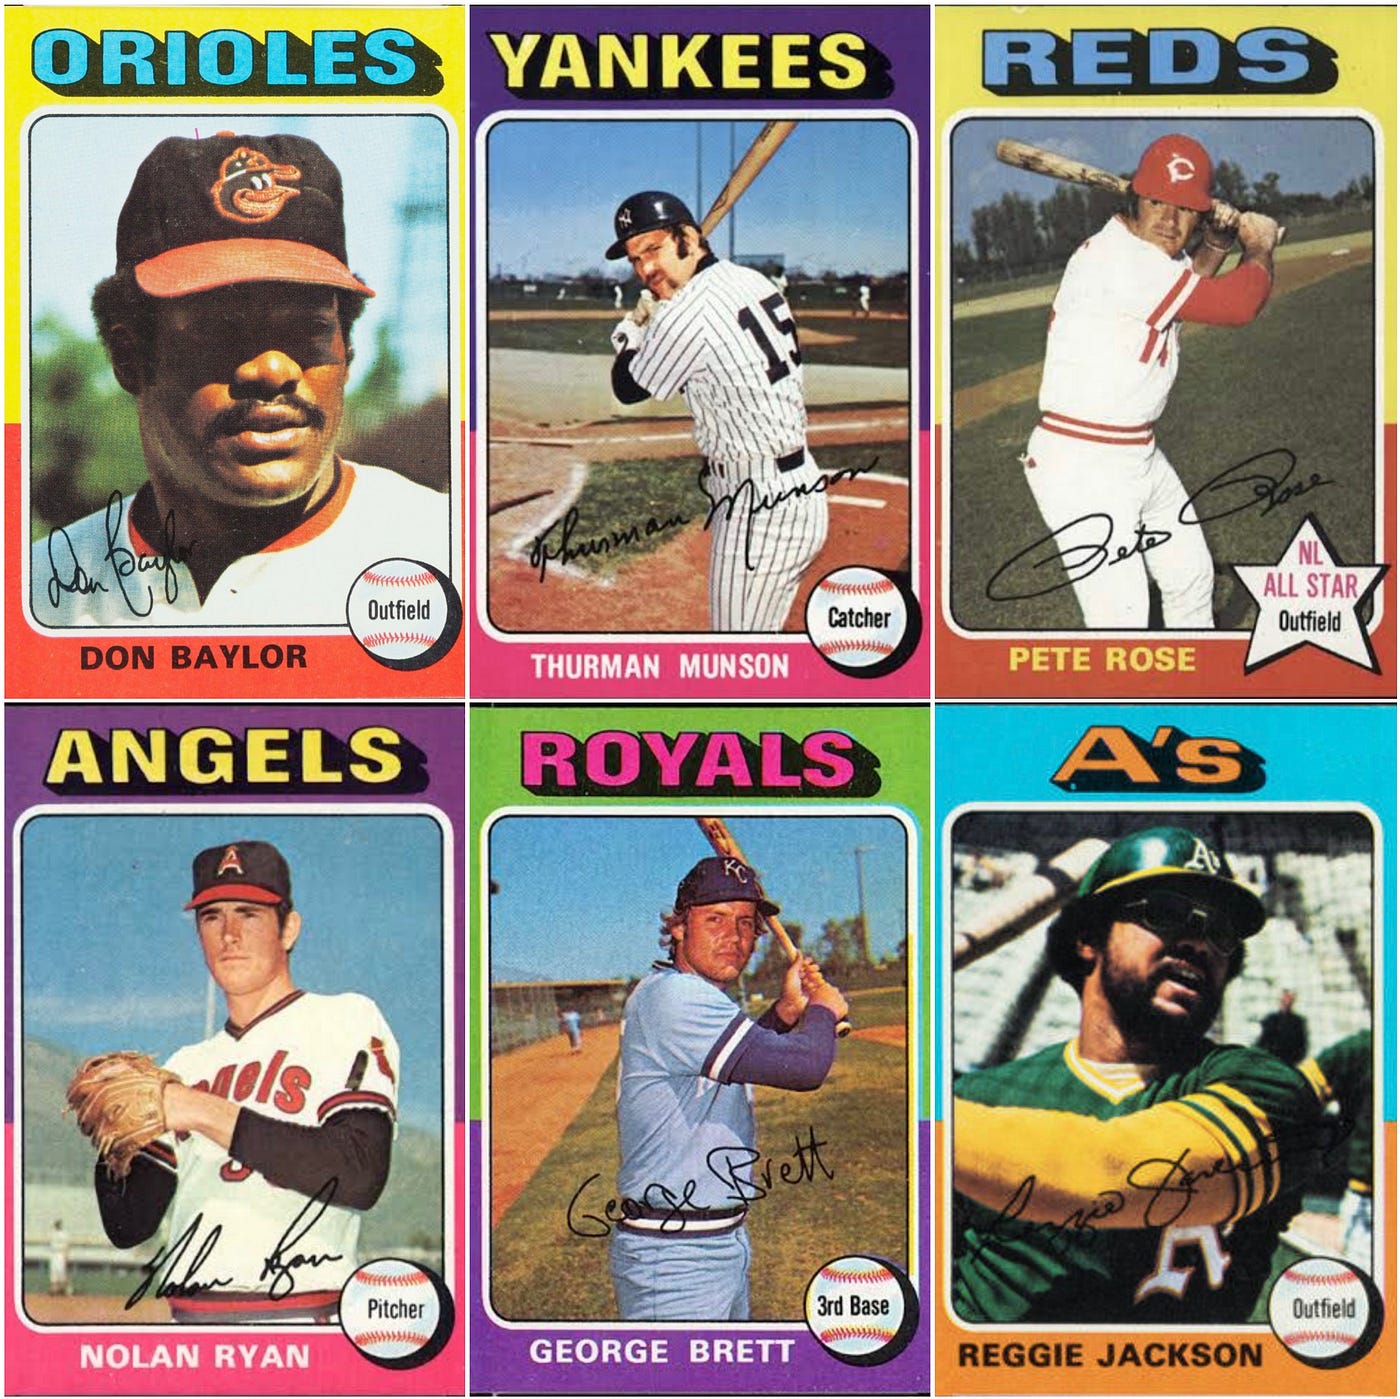 This Is My Kind Of Art. The 1975 Topps baseball card, by Will Hull, Counter Arts